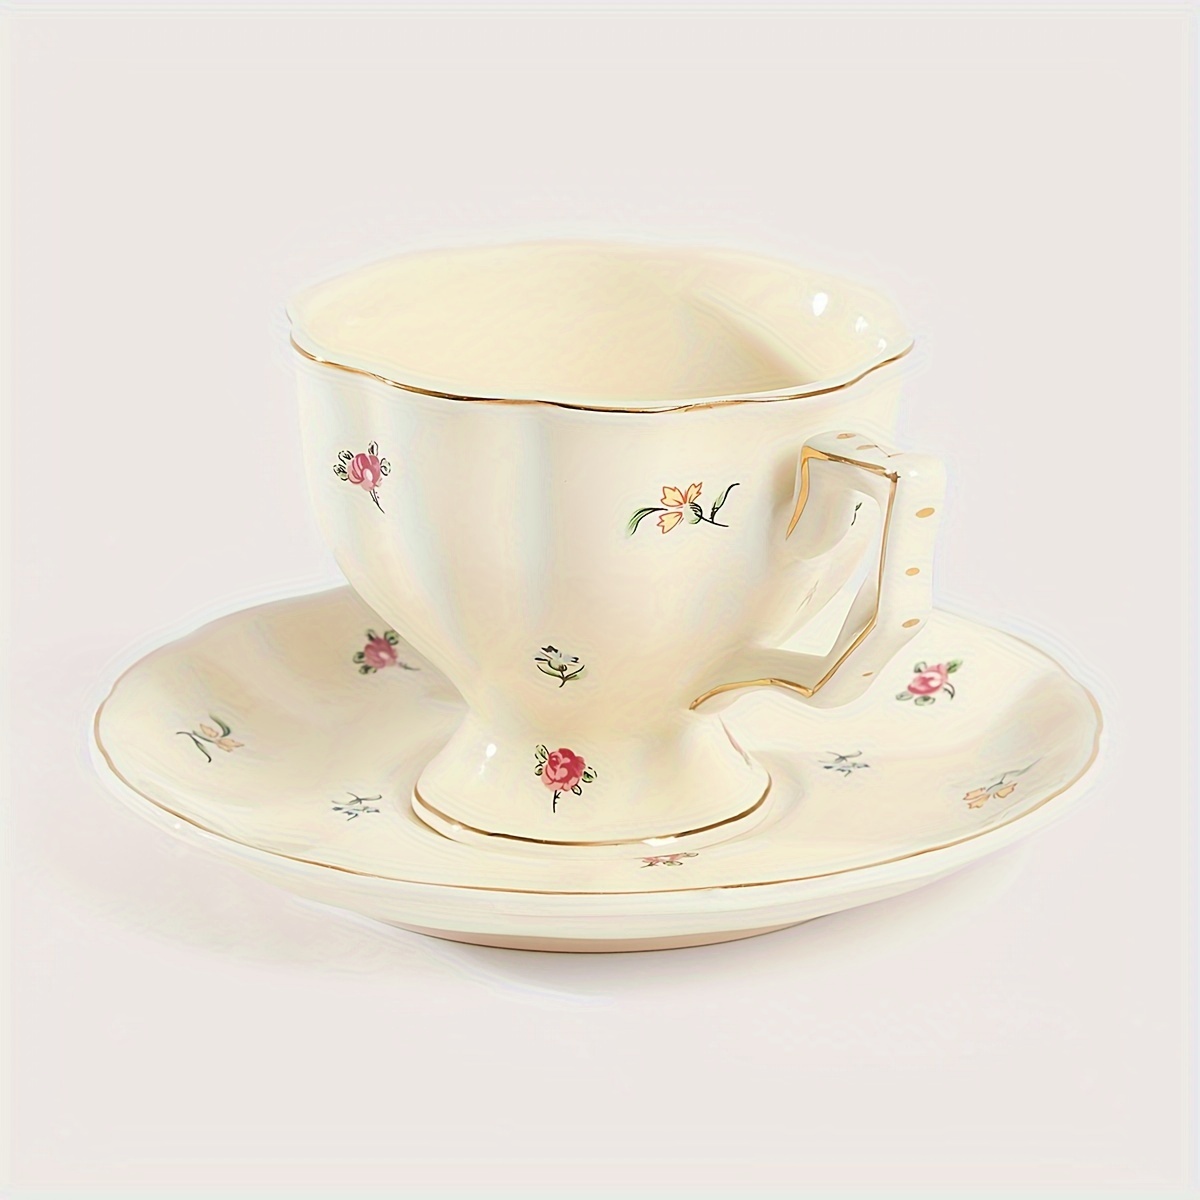 

Set, Floral Pattern Teacup And Saucer, Ceramic Coffee Cup And Saucer Plate, Drinking Cups For Breakfast, Tea Party, Afternoon Tea, Home, Garden, Restaurant And More, Summer Winter Drinkware